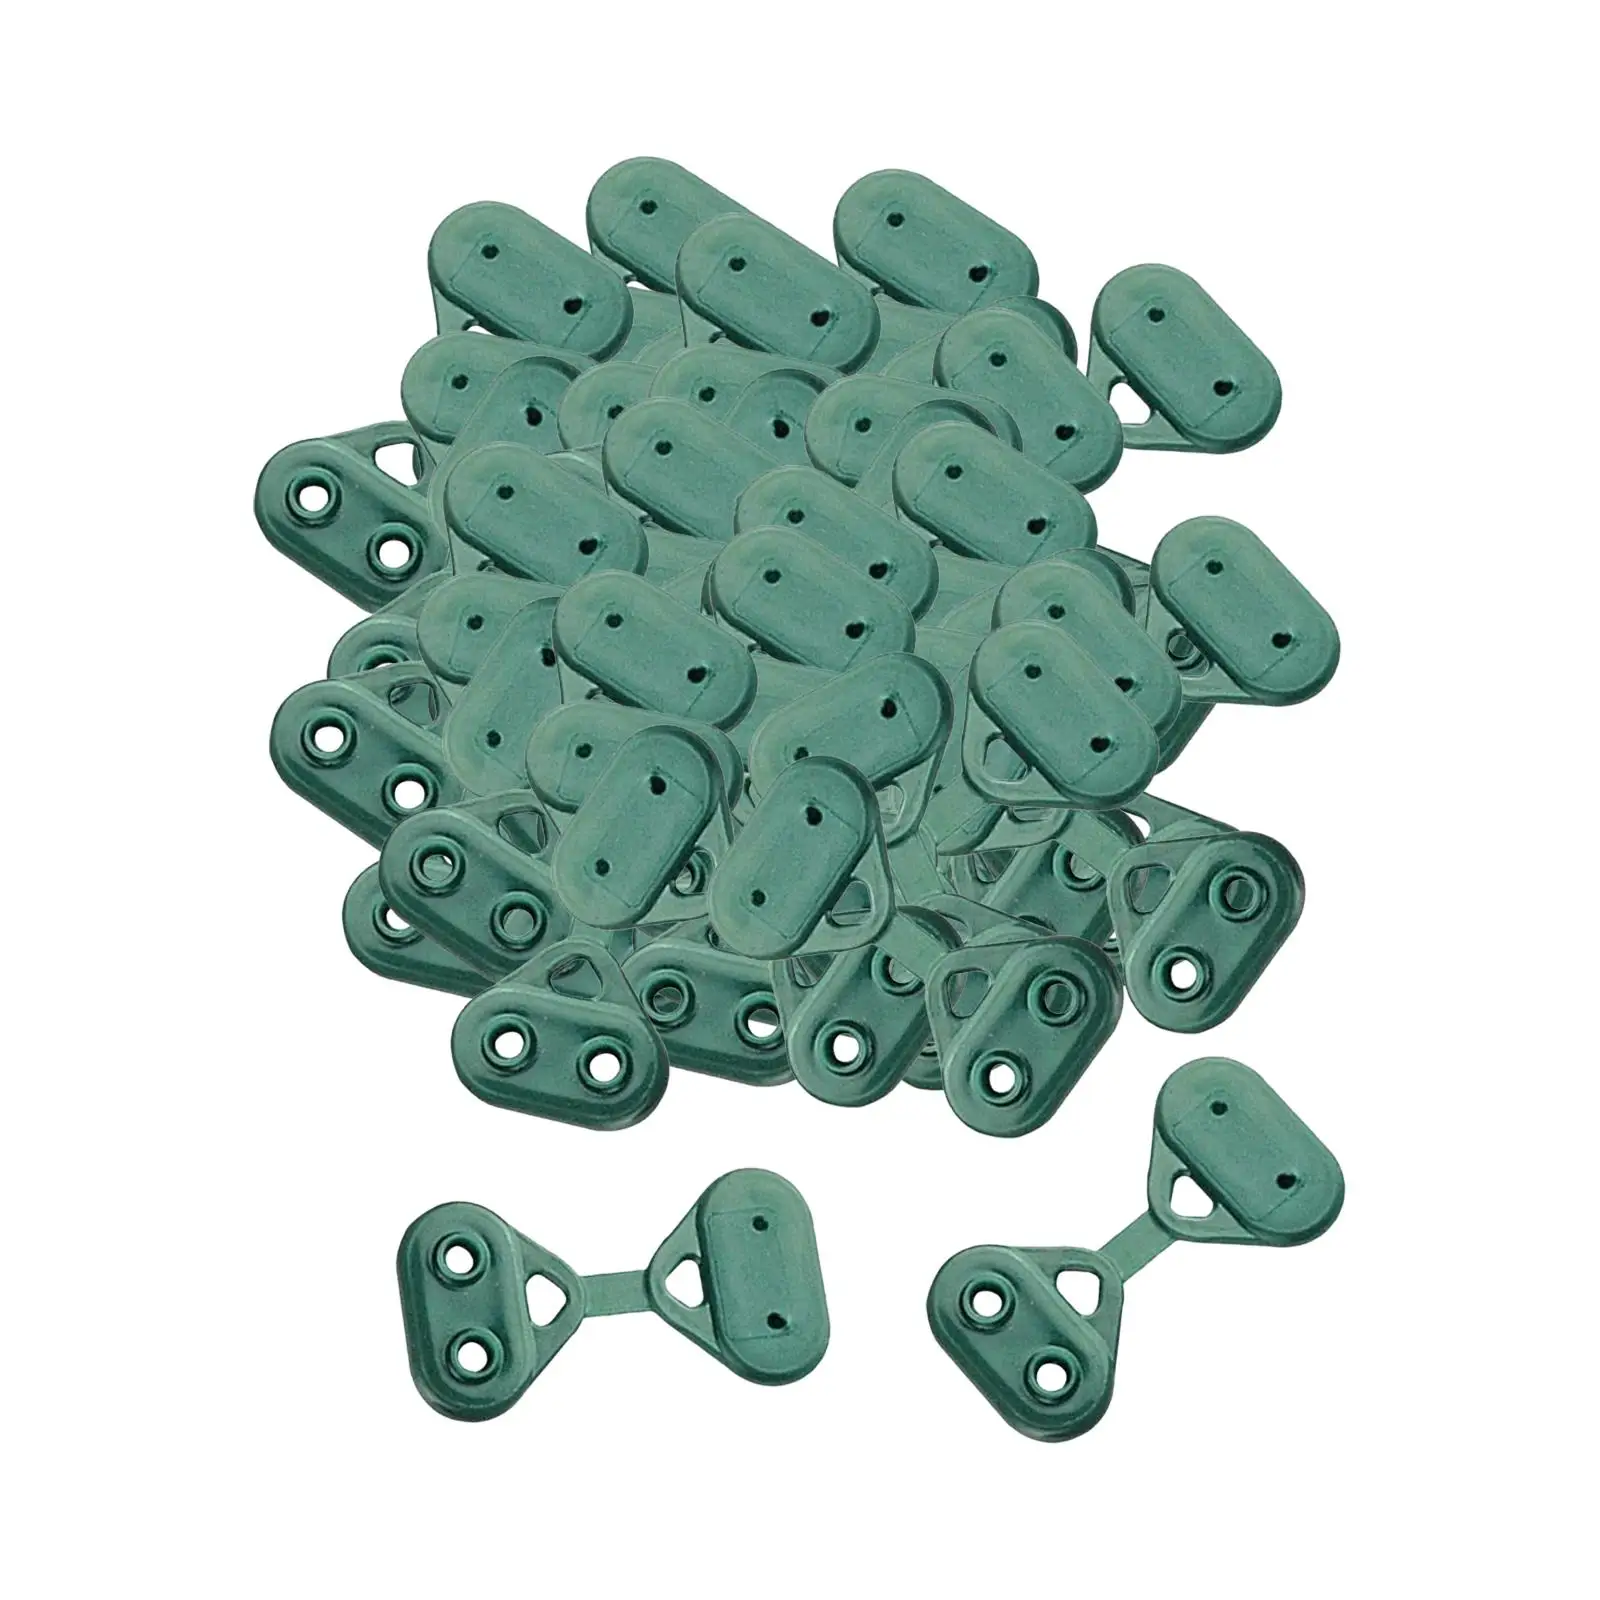 50Pcs Shade Cloth Clips Lock Grip Fixed Clips Shade Hook Clips for Balcony Agricultural Net Greenhouse Anti Bird Netting Outdoor